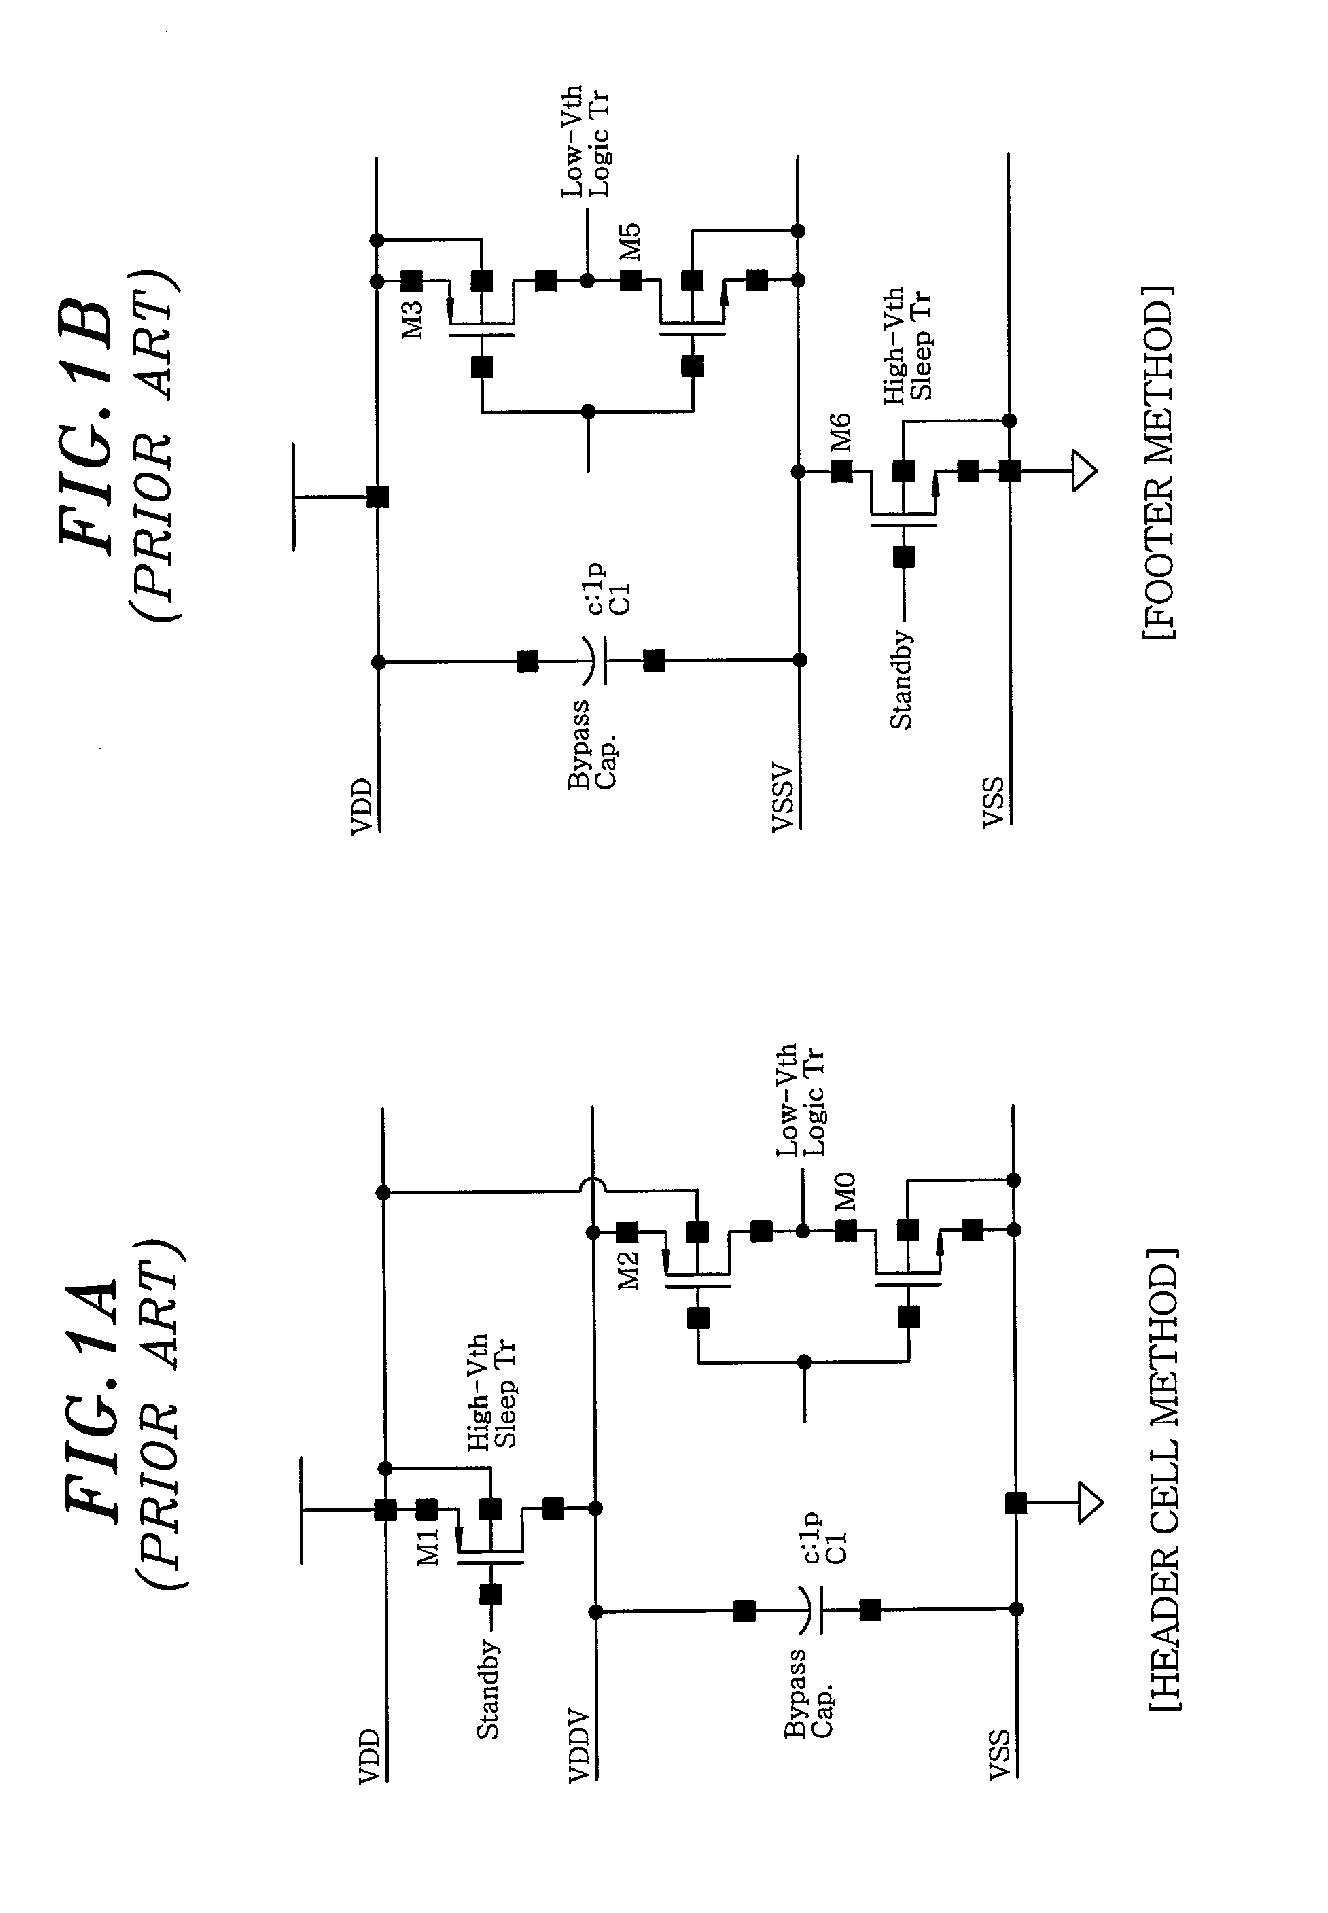 Mtcmos flip-flop with retention function